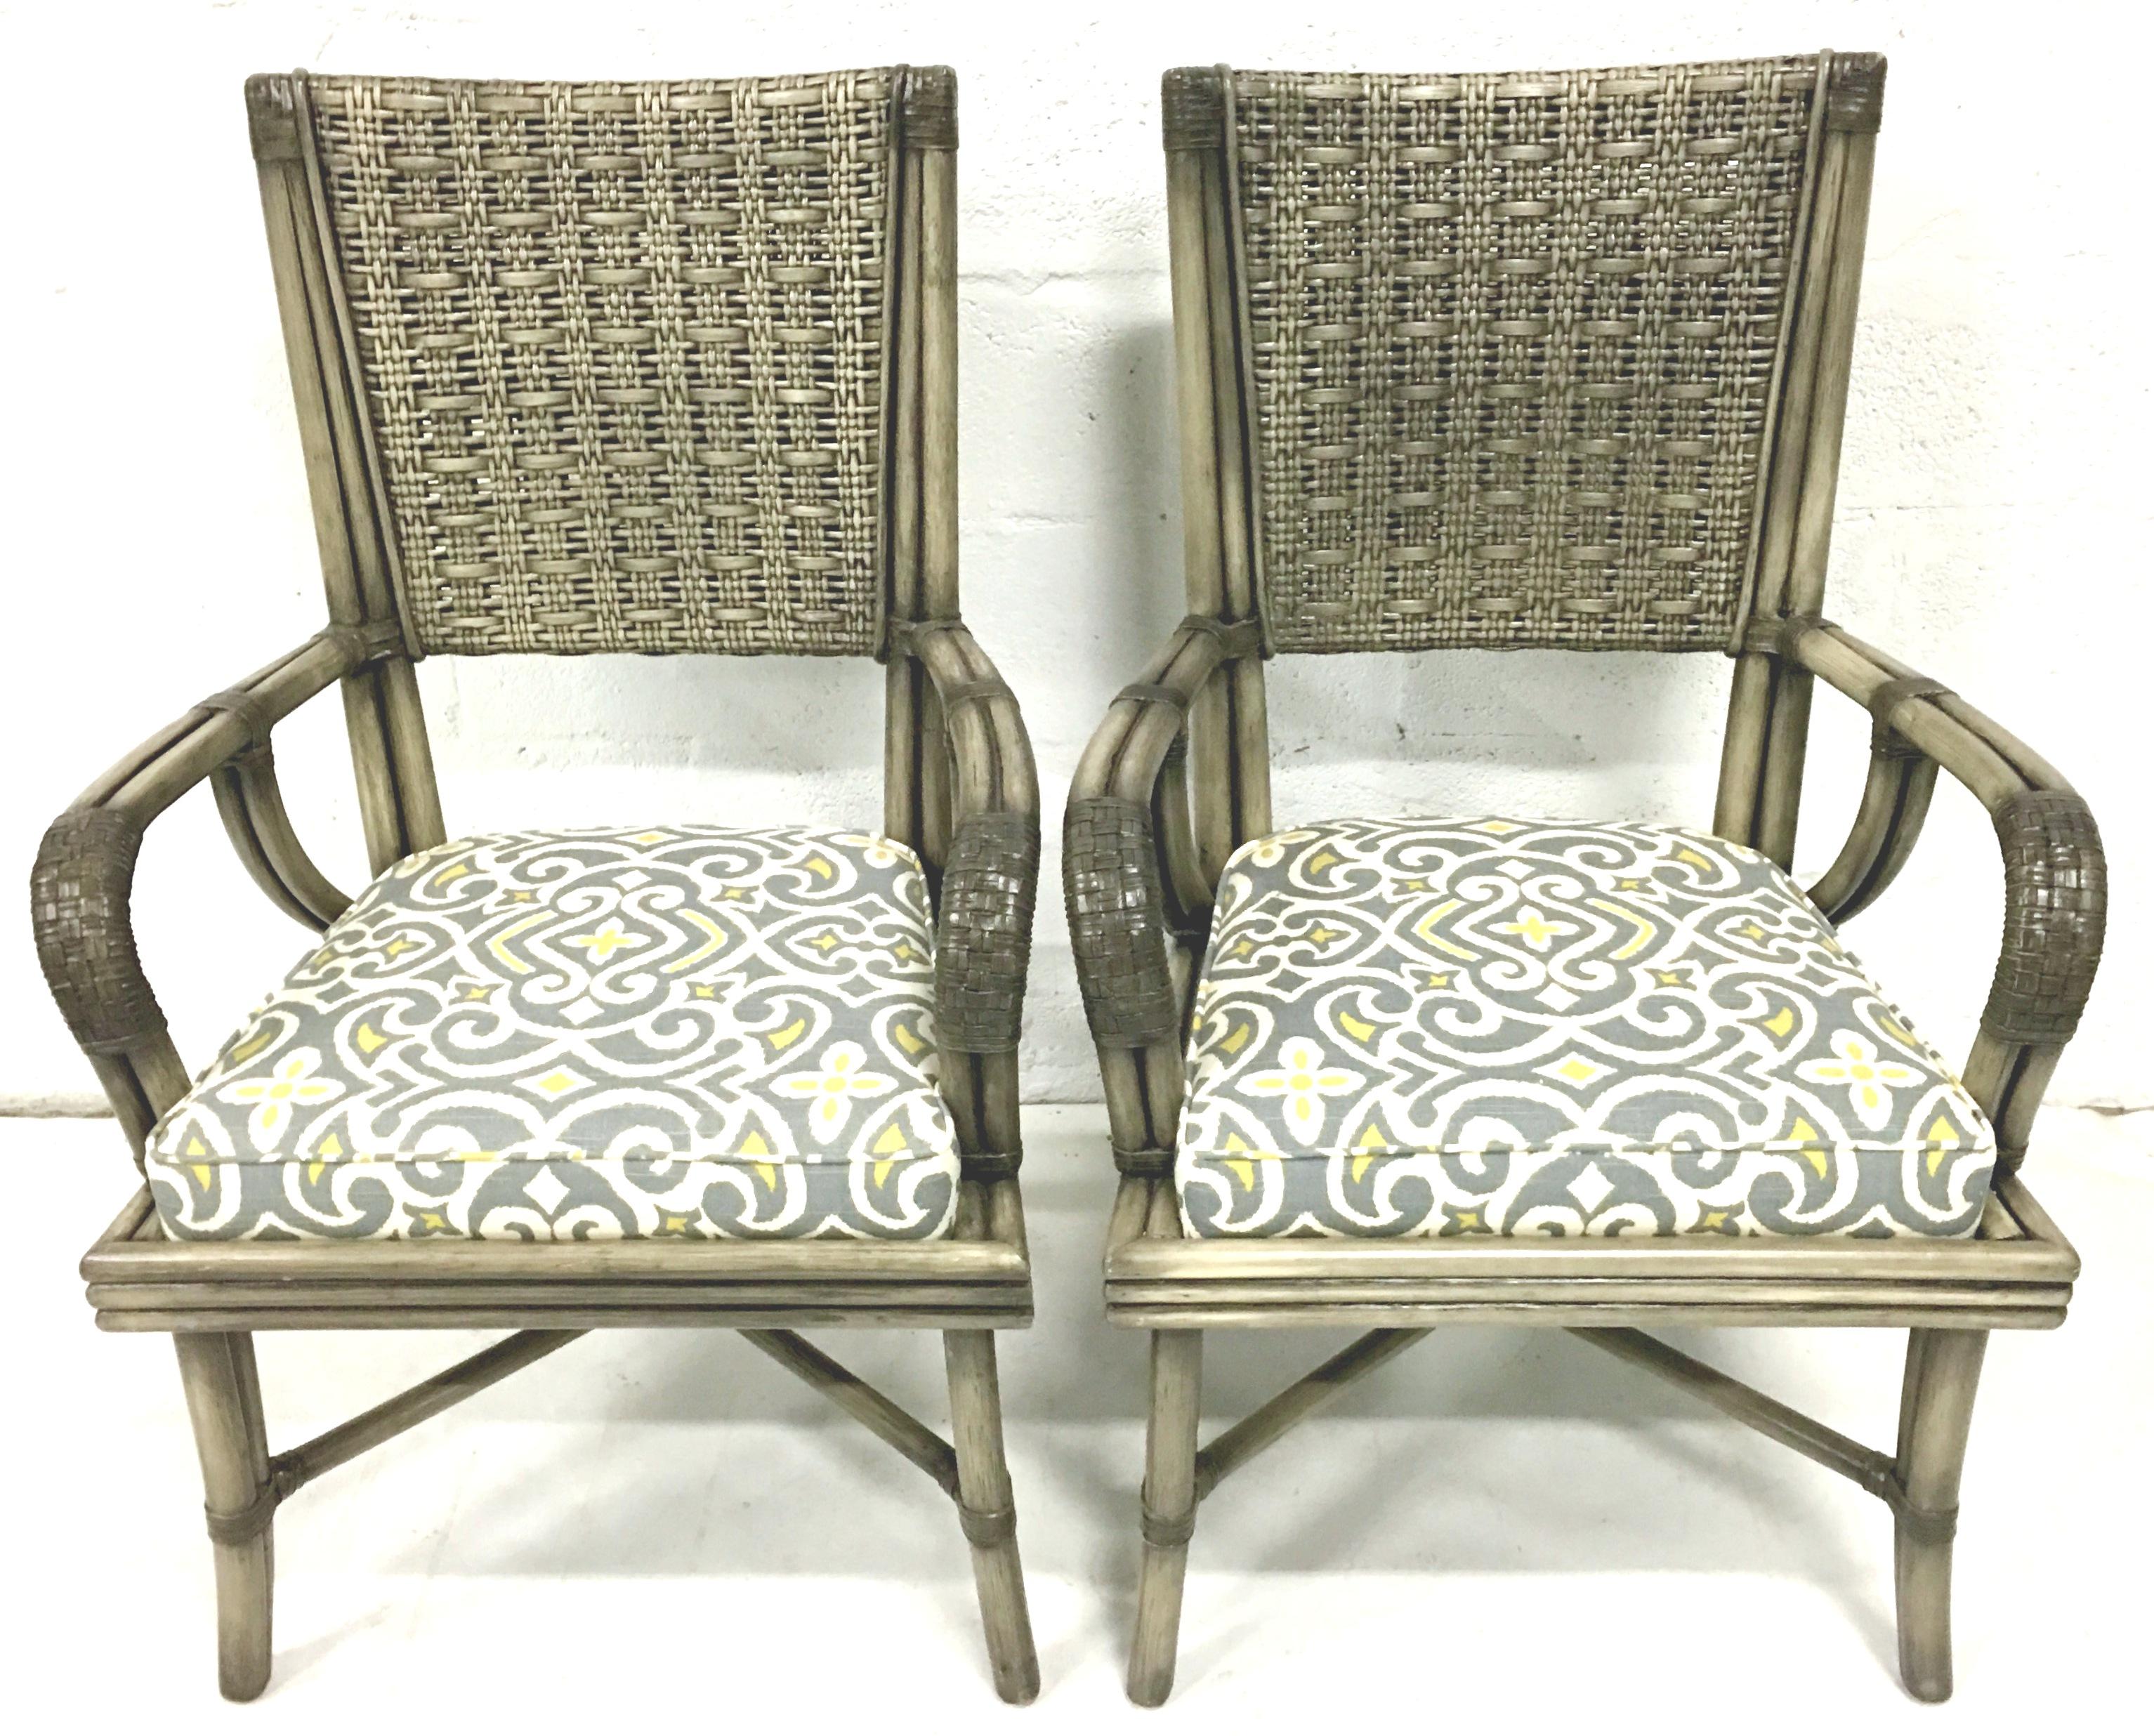 21st Century Pair of Rattan Upholstered Armchairs by, David Francis In Good Condition For Sale In West Palm Beach, FL